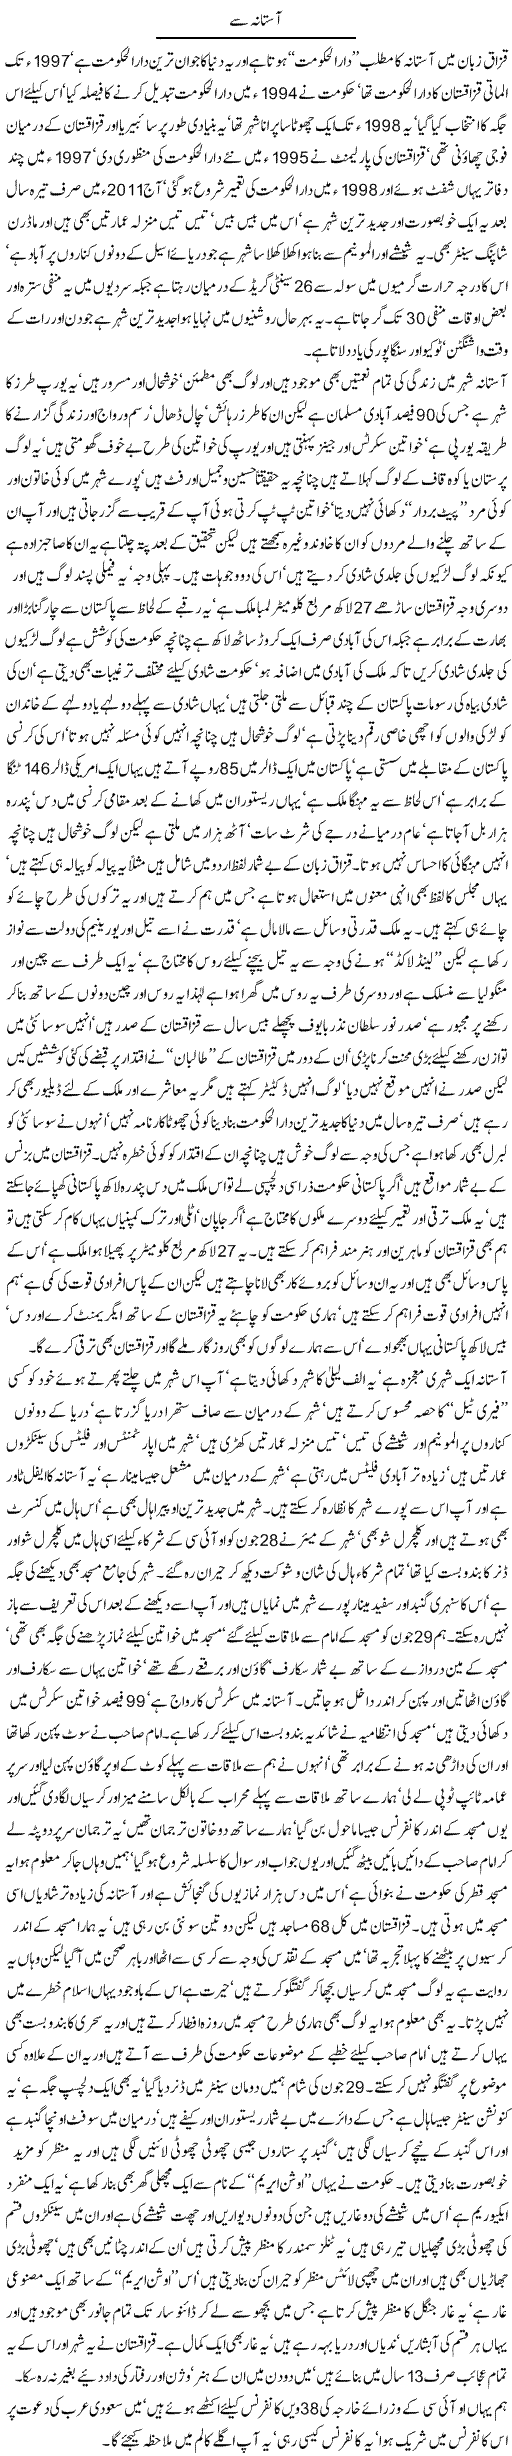 From Astana Express Column Javed Chaudhry 1 July 2011